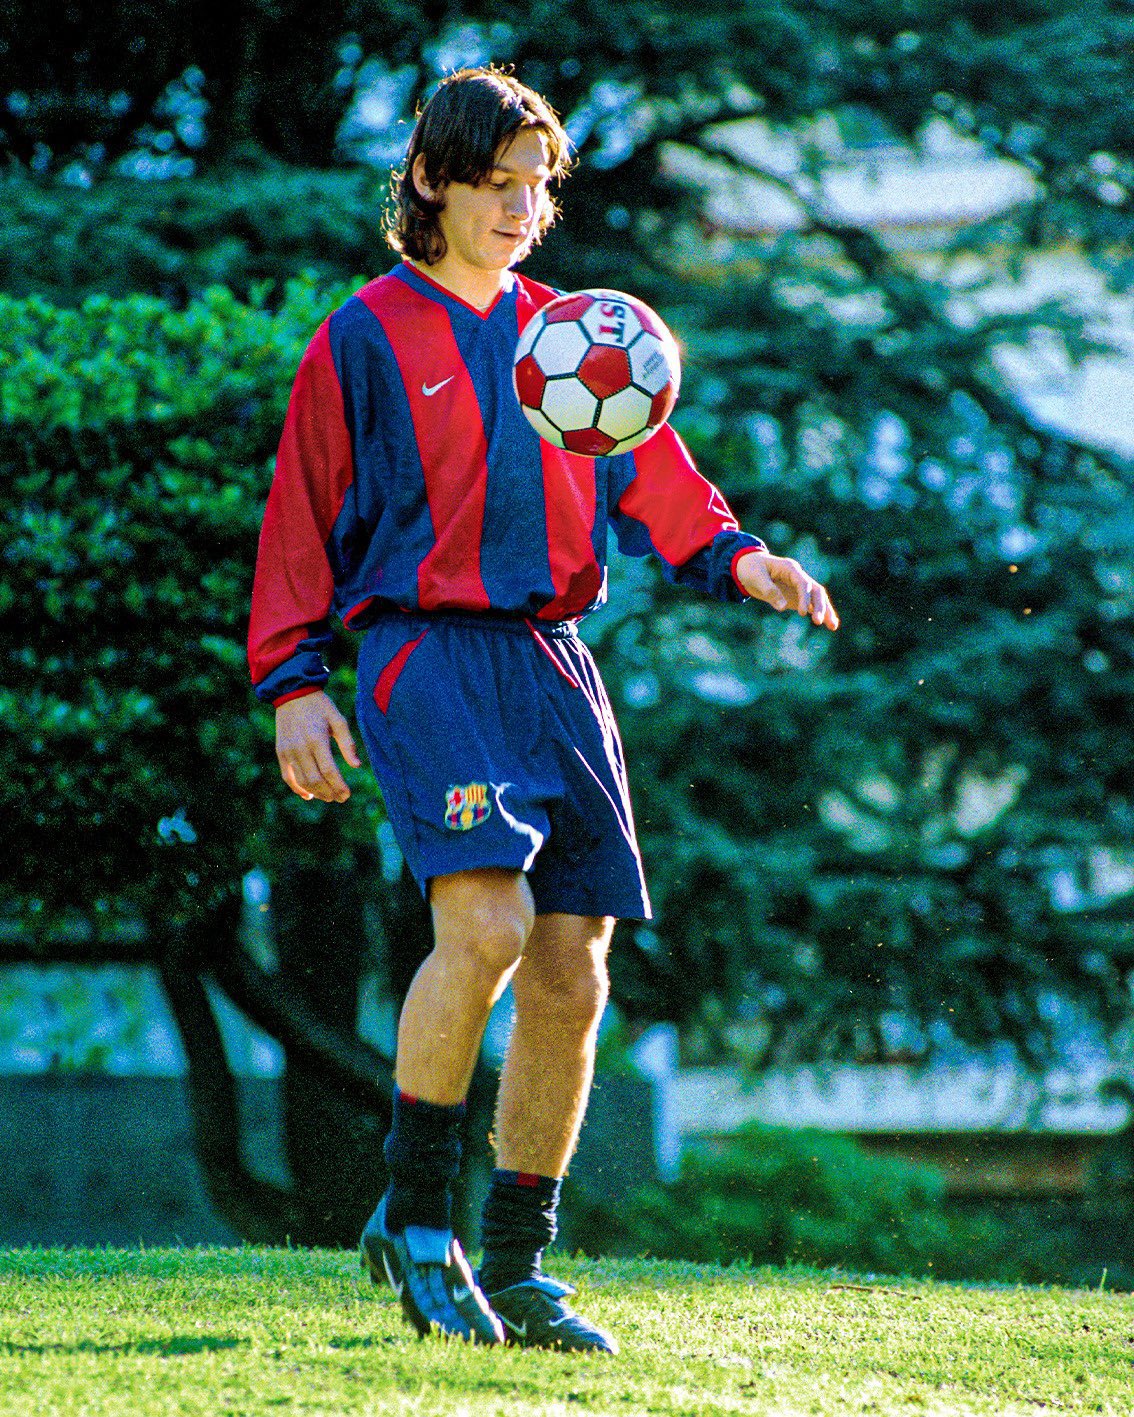 Club Clobber on "Legacy 🐐 A picture of Lionel Messi wearing Nike boots is as rare as Messi in a Barca shirt https://t.co/2D5MCagAcK" /